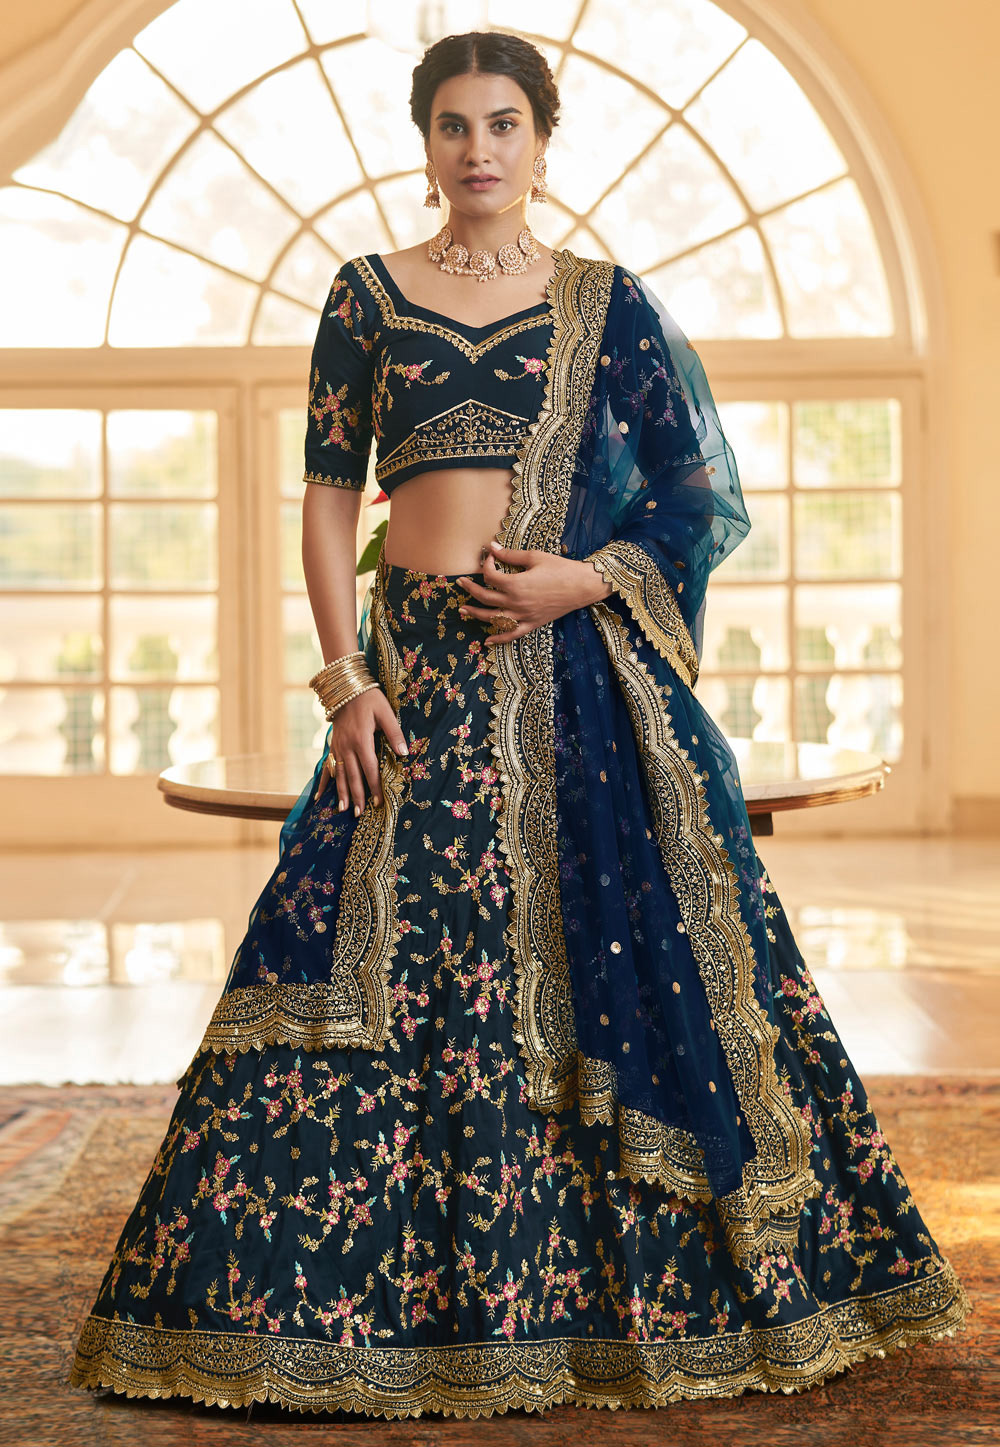 Yasin Siddique Boutique kupondol - Royal blue and golden lehenga set.. For  any inquiries and Further details please message us on viber/ watsapp on  9851171551 or inbox us... Location: Kupondole, kaandevta sthaan,